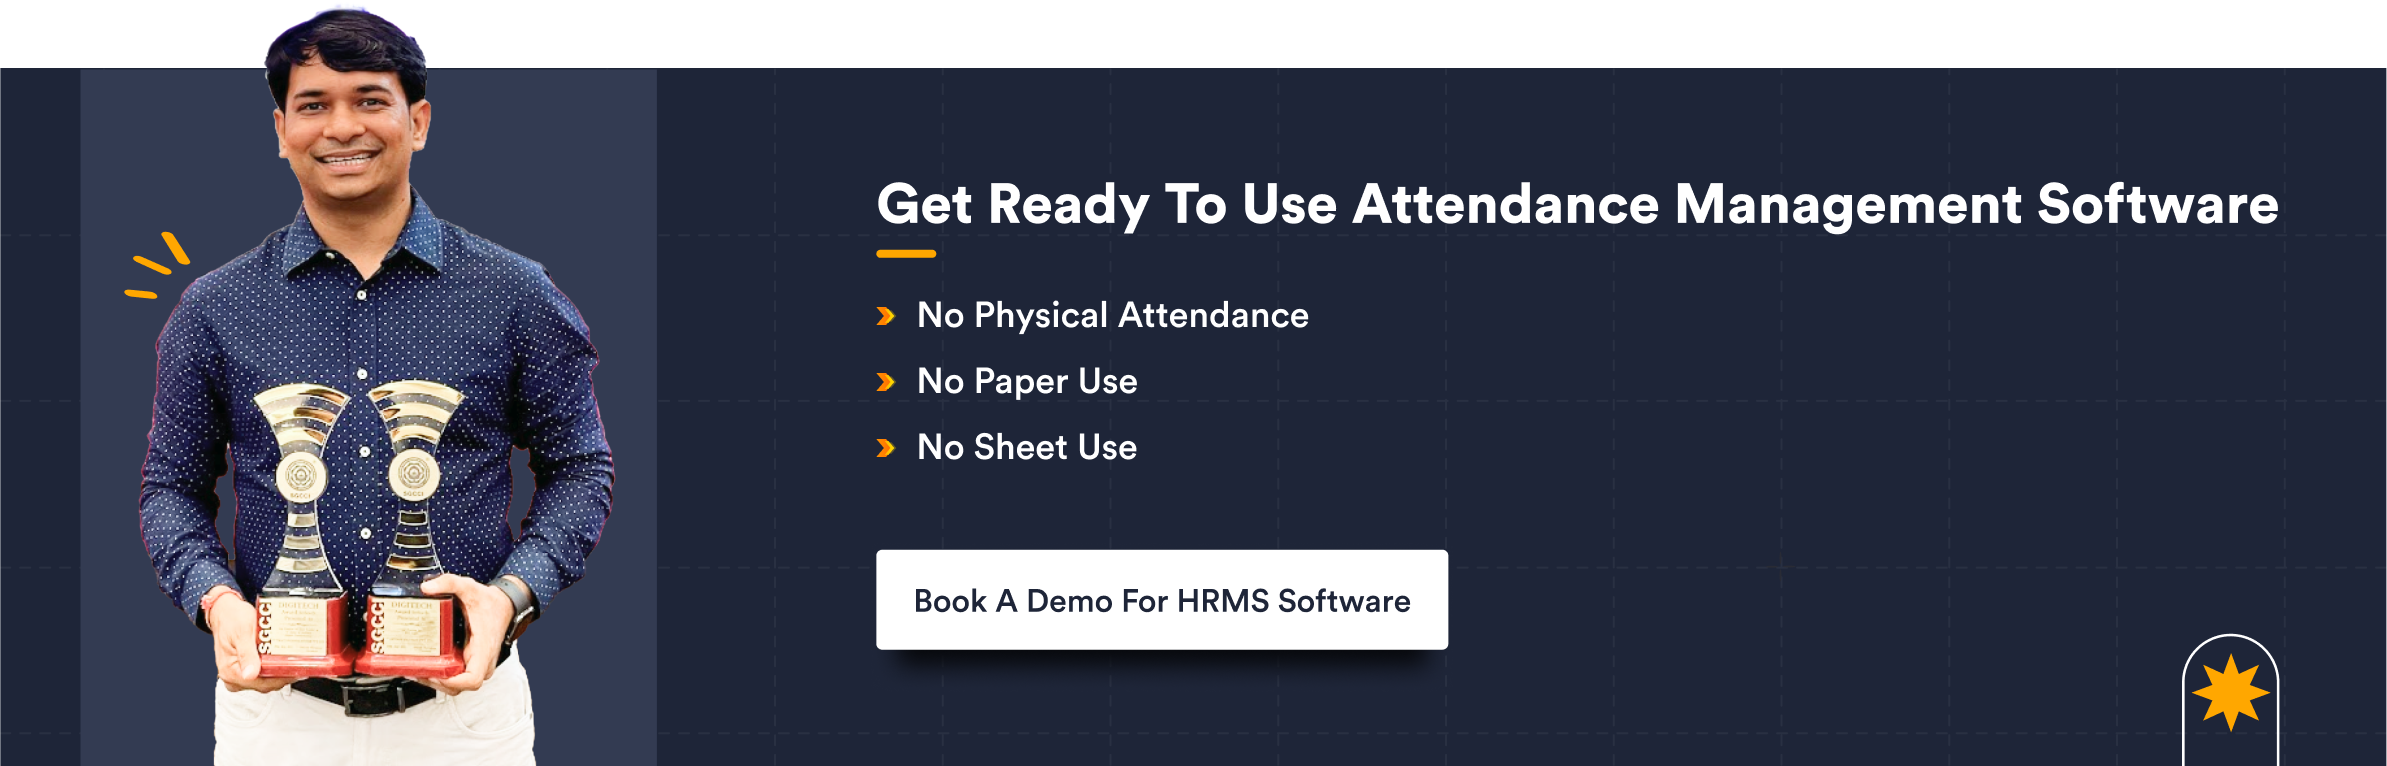 Get Ready To Use Attendance Management Software